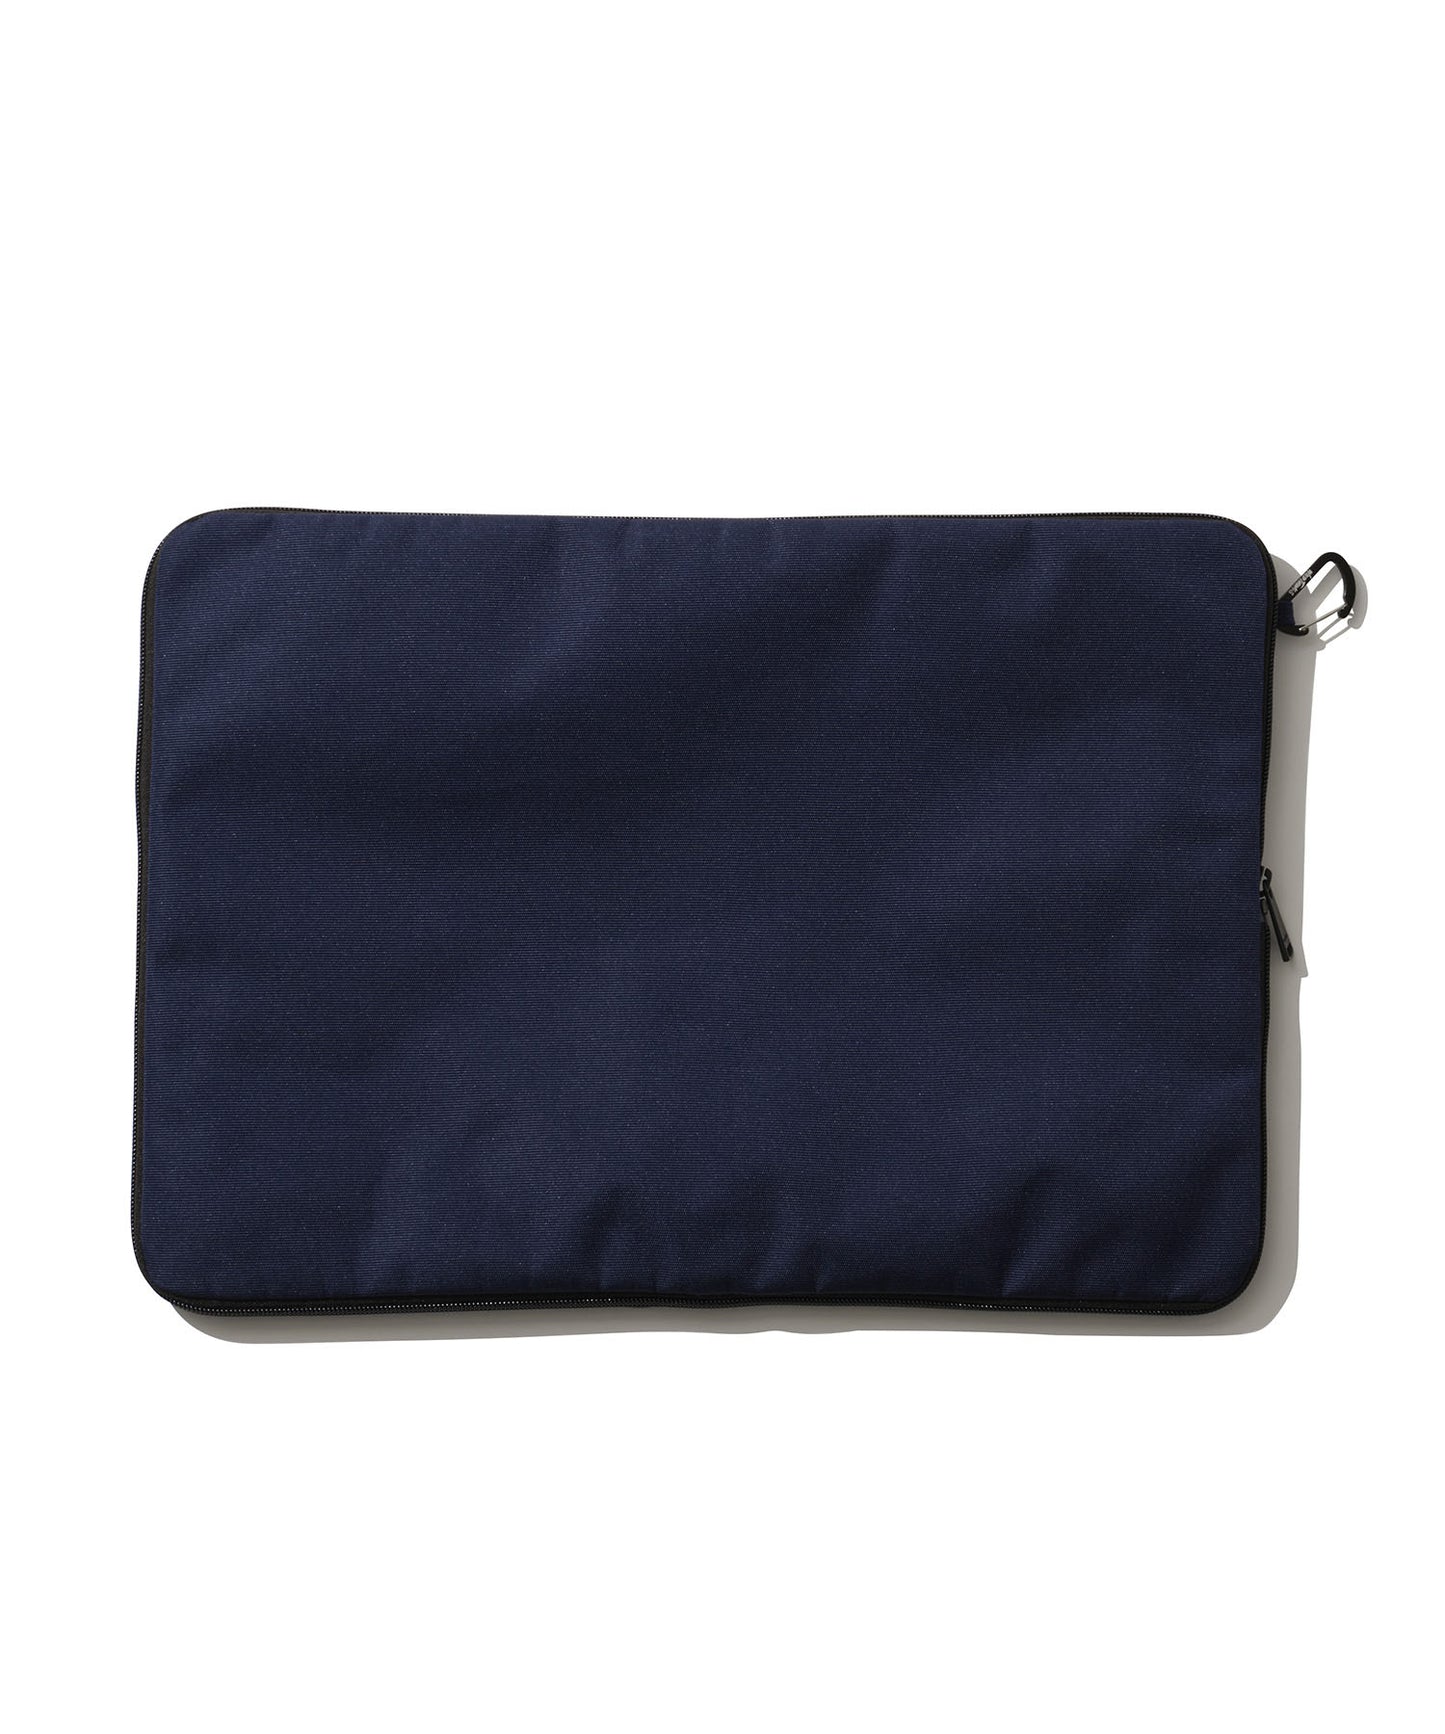 [WILD THINGS ワイルドシングス] THE PX MULTI POUCH A3｜マルチポーチ(A3)＜NAVY＞